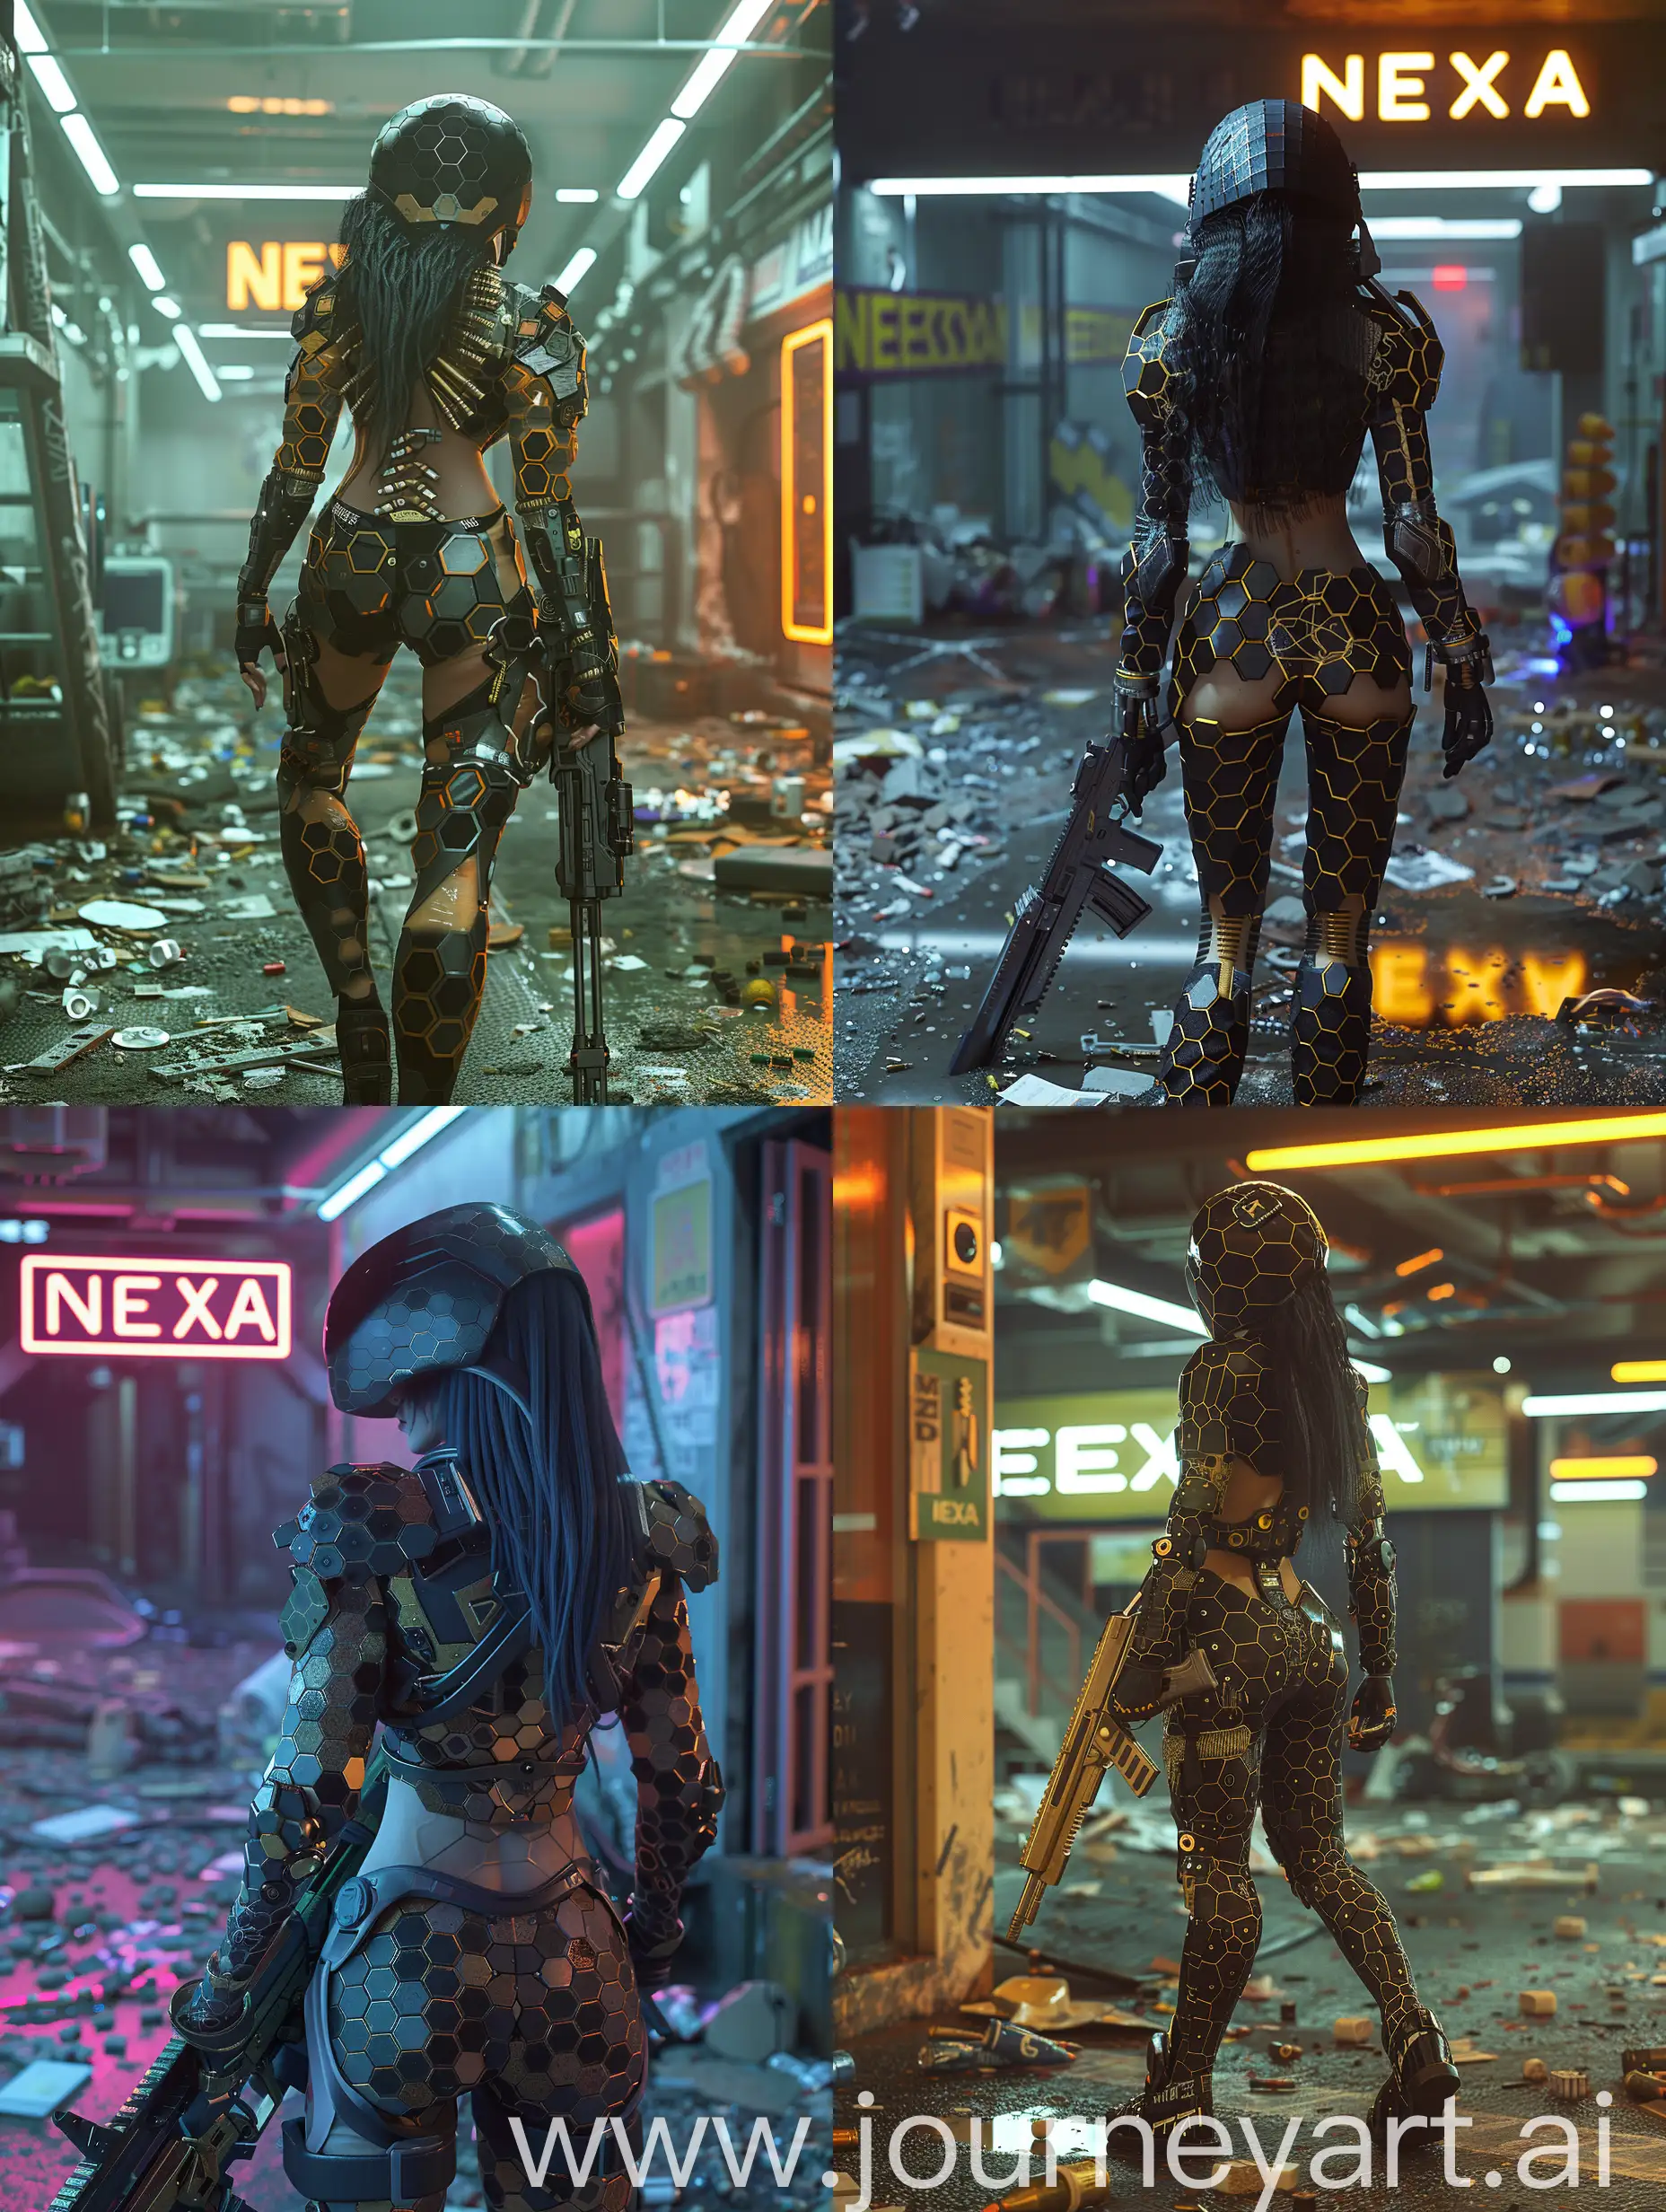 In a dynamic infrared diffusion camera shot, the wide-open advanced cyberpunk military compound features a sign reading NEXA. Cinematic rim lighting highlights every detail, showcasing a female wearing cybnetic hexagonal patterned super-advanced armour with a hexagonal patterned black helmet-shaped, helmet showing her  hair and body interface of artificial components, including military cybernetic enhancements such as neural interfaces, robotic limbs, and body implants. The armor, adorned with intricate hexagonal black and gold detailing, is revealed, as the warrior carries a gleaming rifle amidst neon-lit reflections and litter on the gritty floor. Each element is rendered in stunning high definition, capturing the essence of the cyberpunk world with unparalleled realism in this digital art piece.

